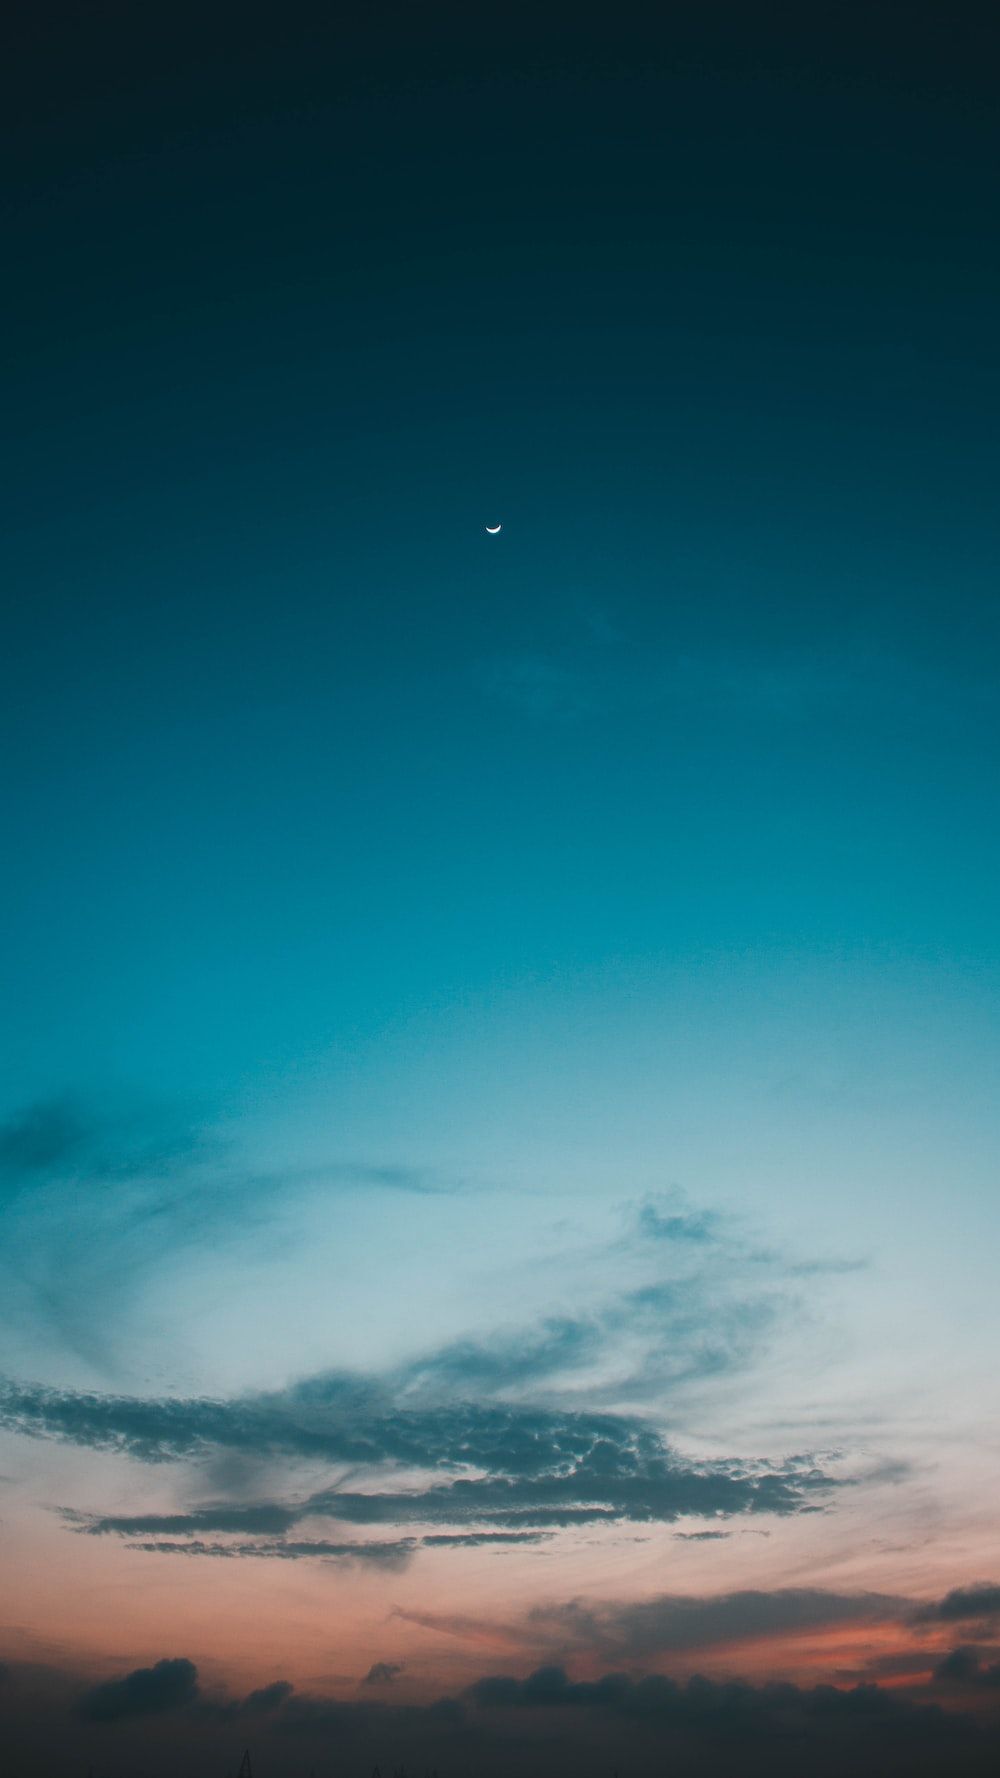 A blue sky with a crescent moon in the distance - Cyan, illustration